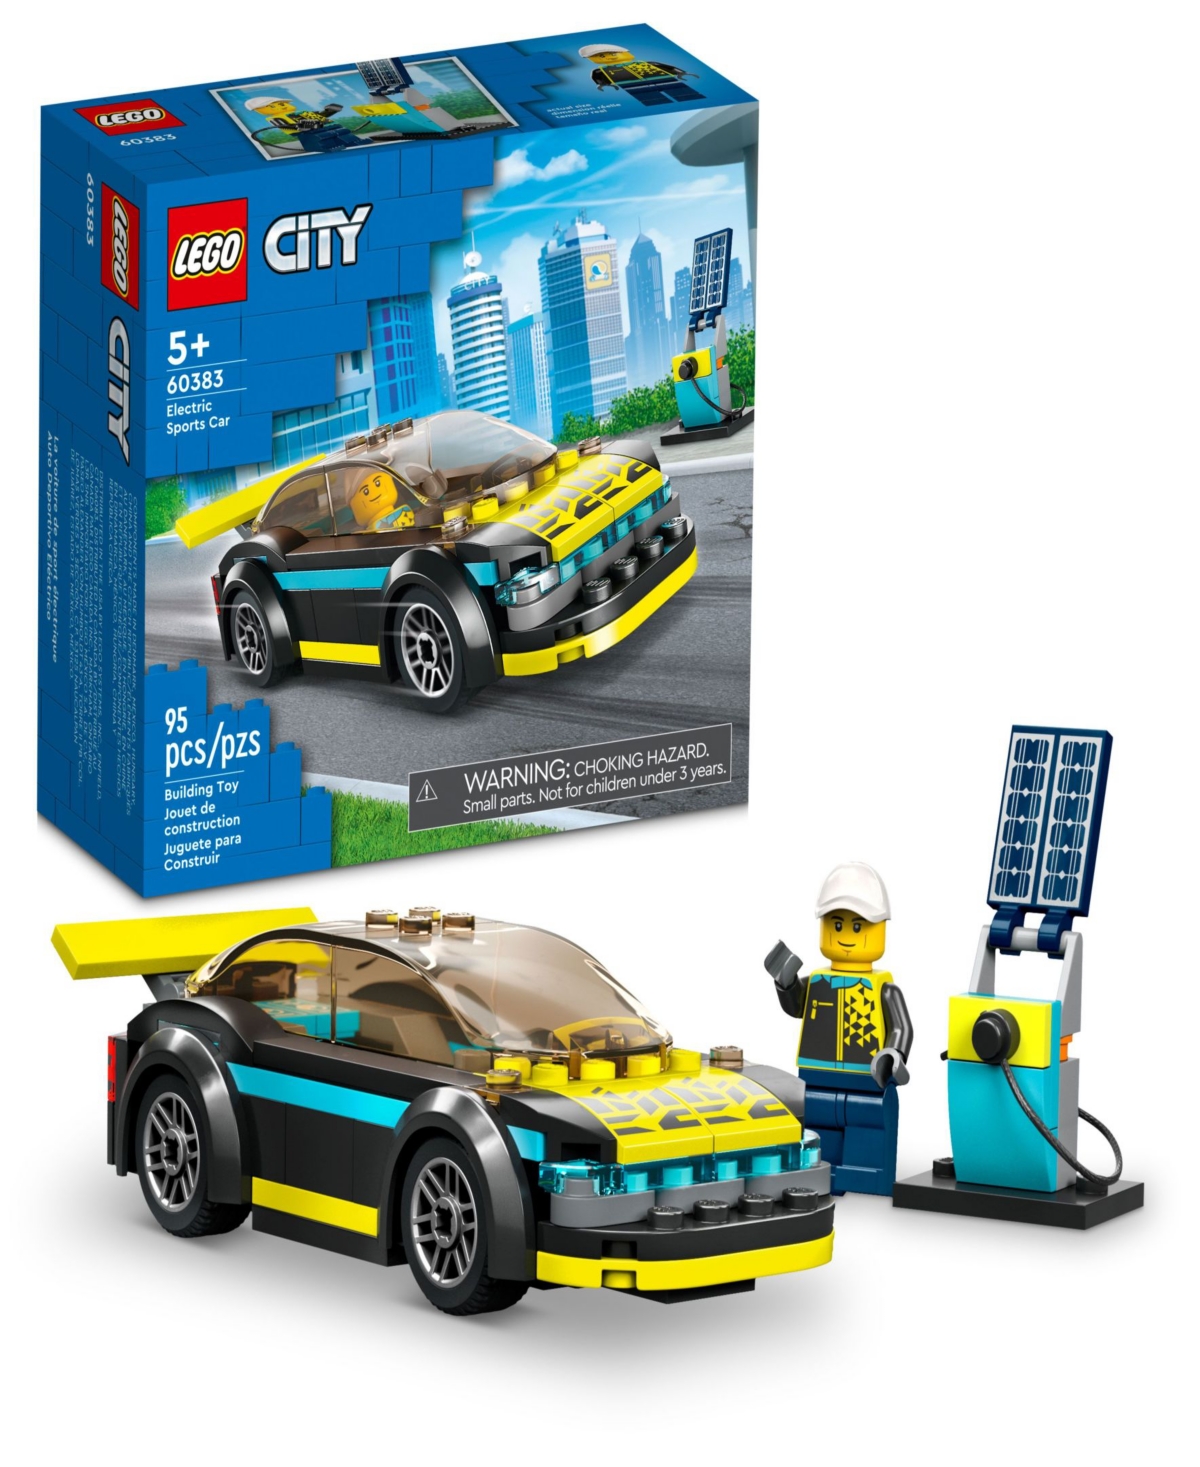 Lego City Great Vehicles Electric Sports Car Model With Minifigure 60383 Toy Building Set In Multicolor